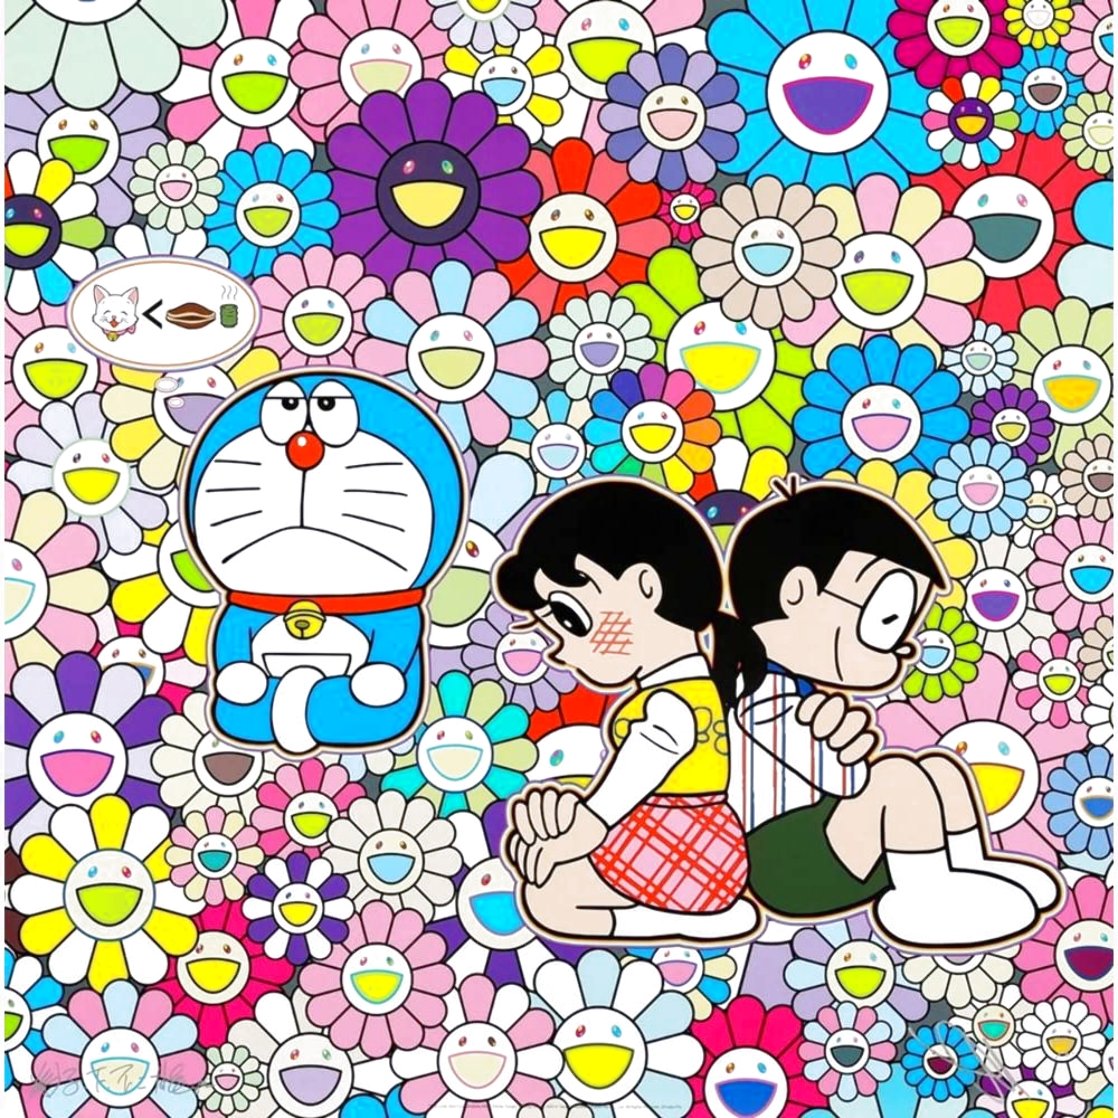 First Love and I Contemplate About Dinner Tonight 2020 Limited Edition Print by Takashi Murakami